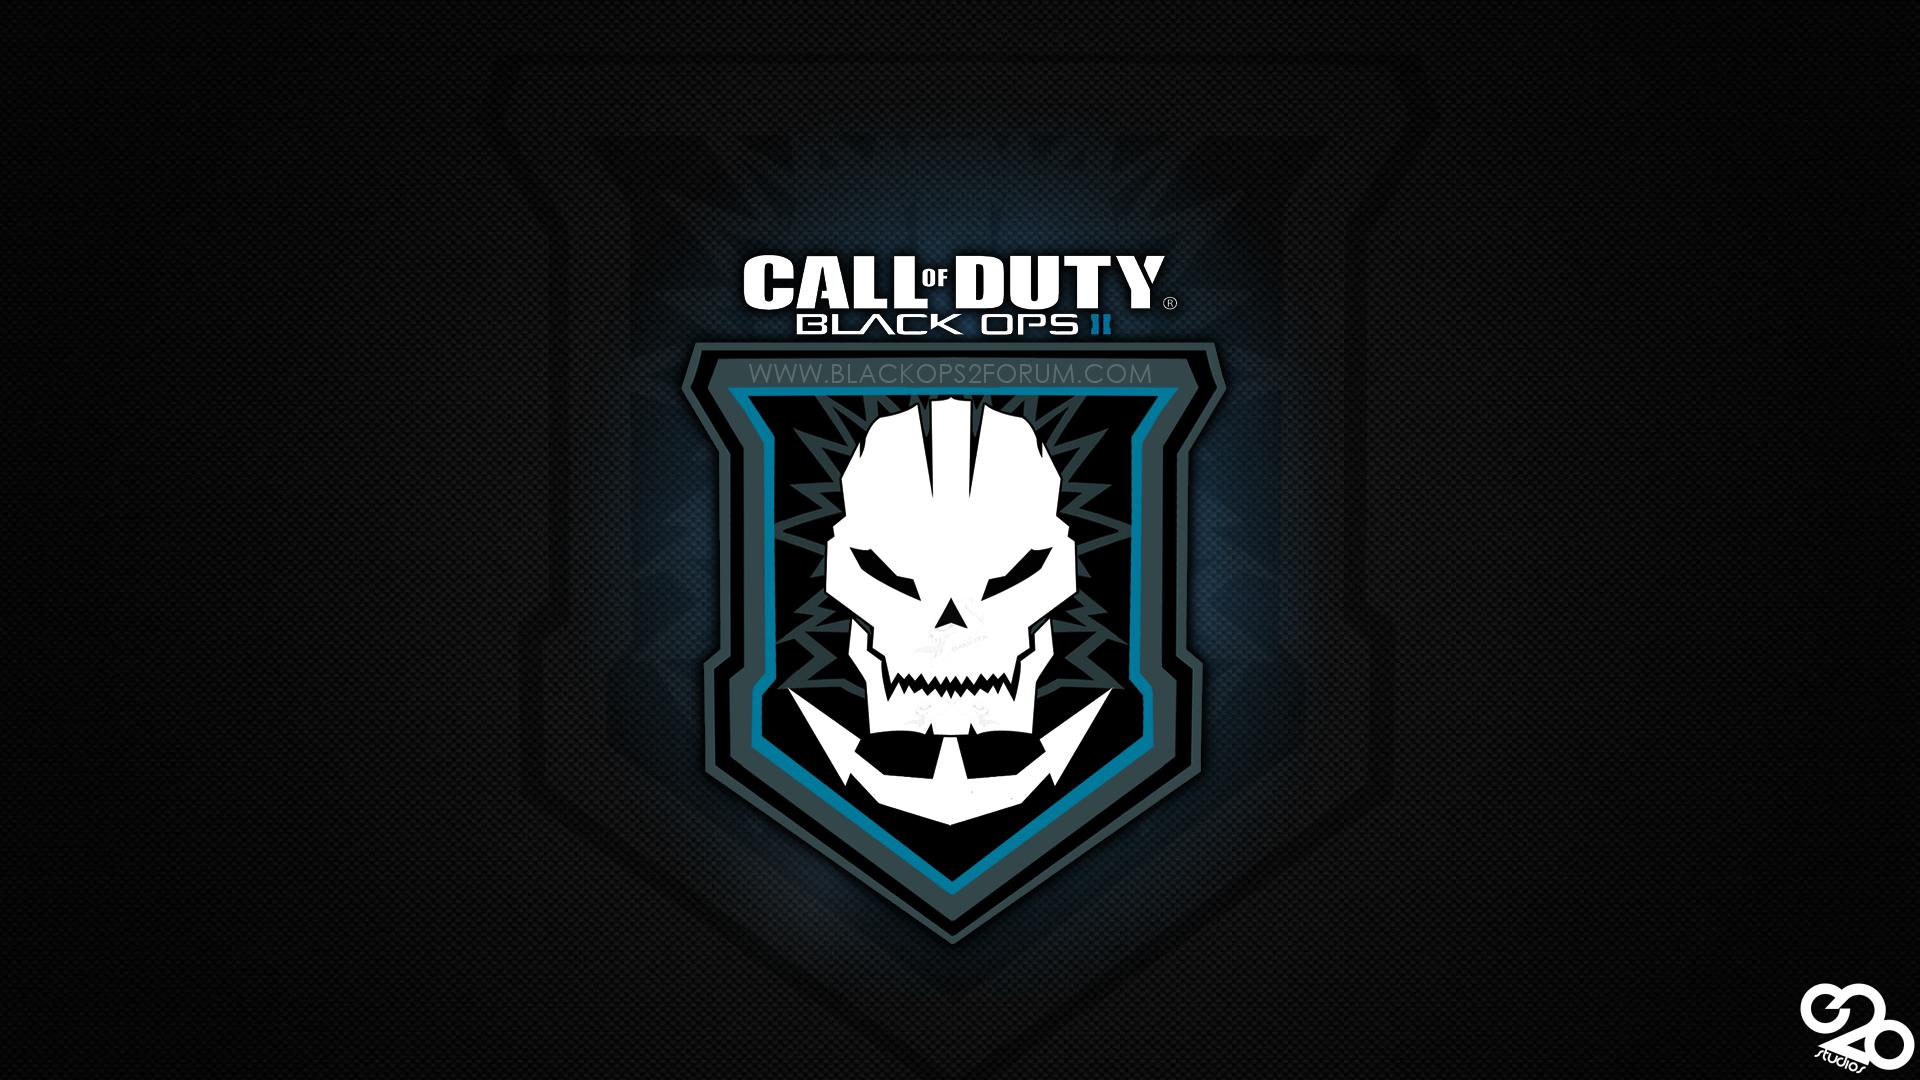 New Black Ops 2 Wallpapers enjoy The Unofficial Call of Duty 1920x1080